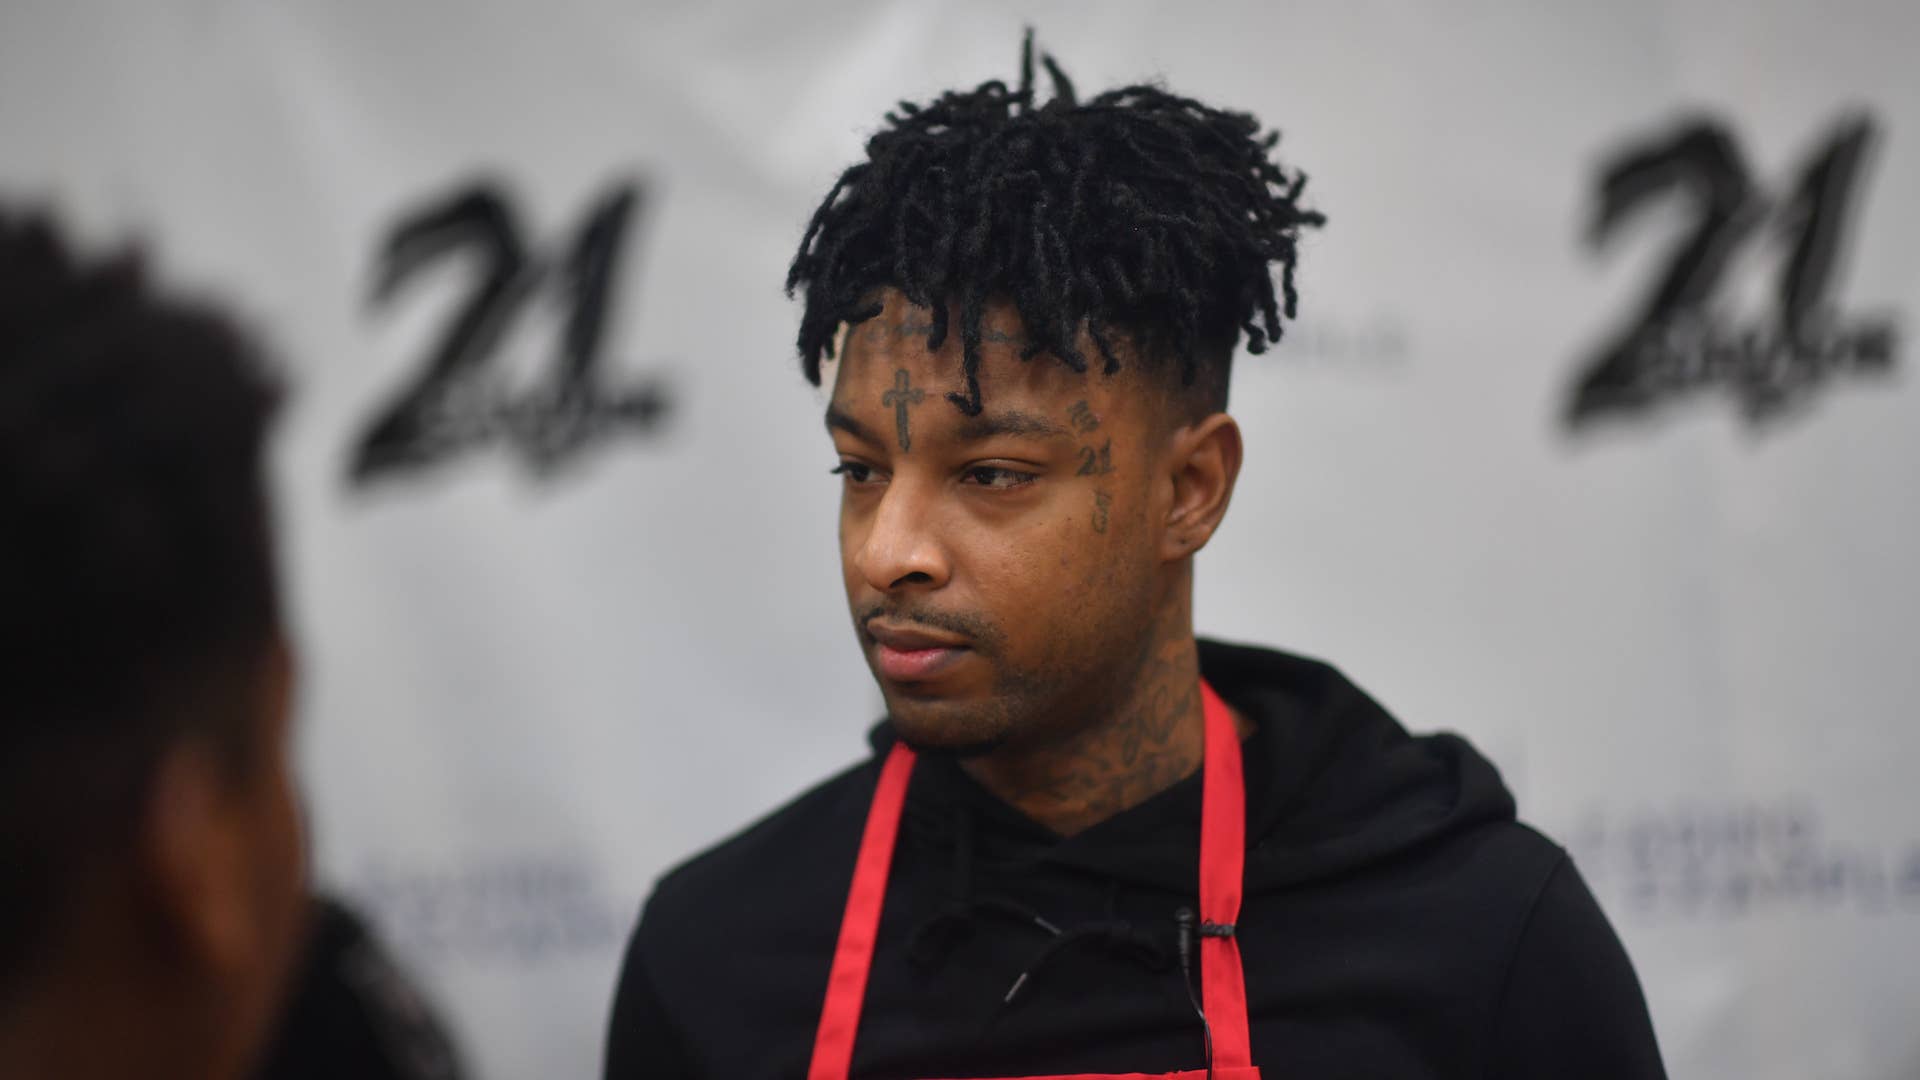 21 Savage Expands Bank Account Campaign To Provide More Youth With